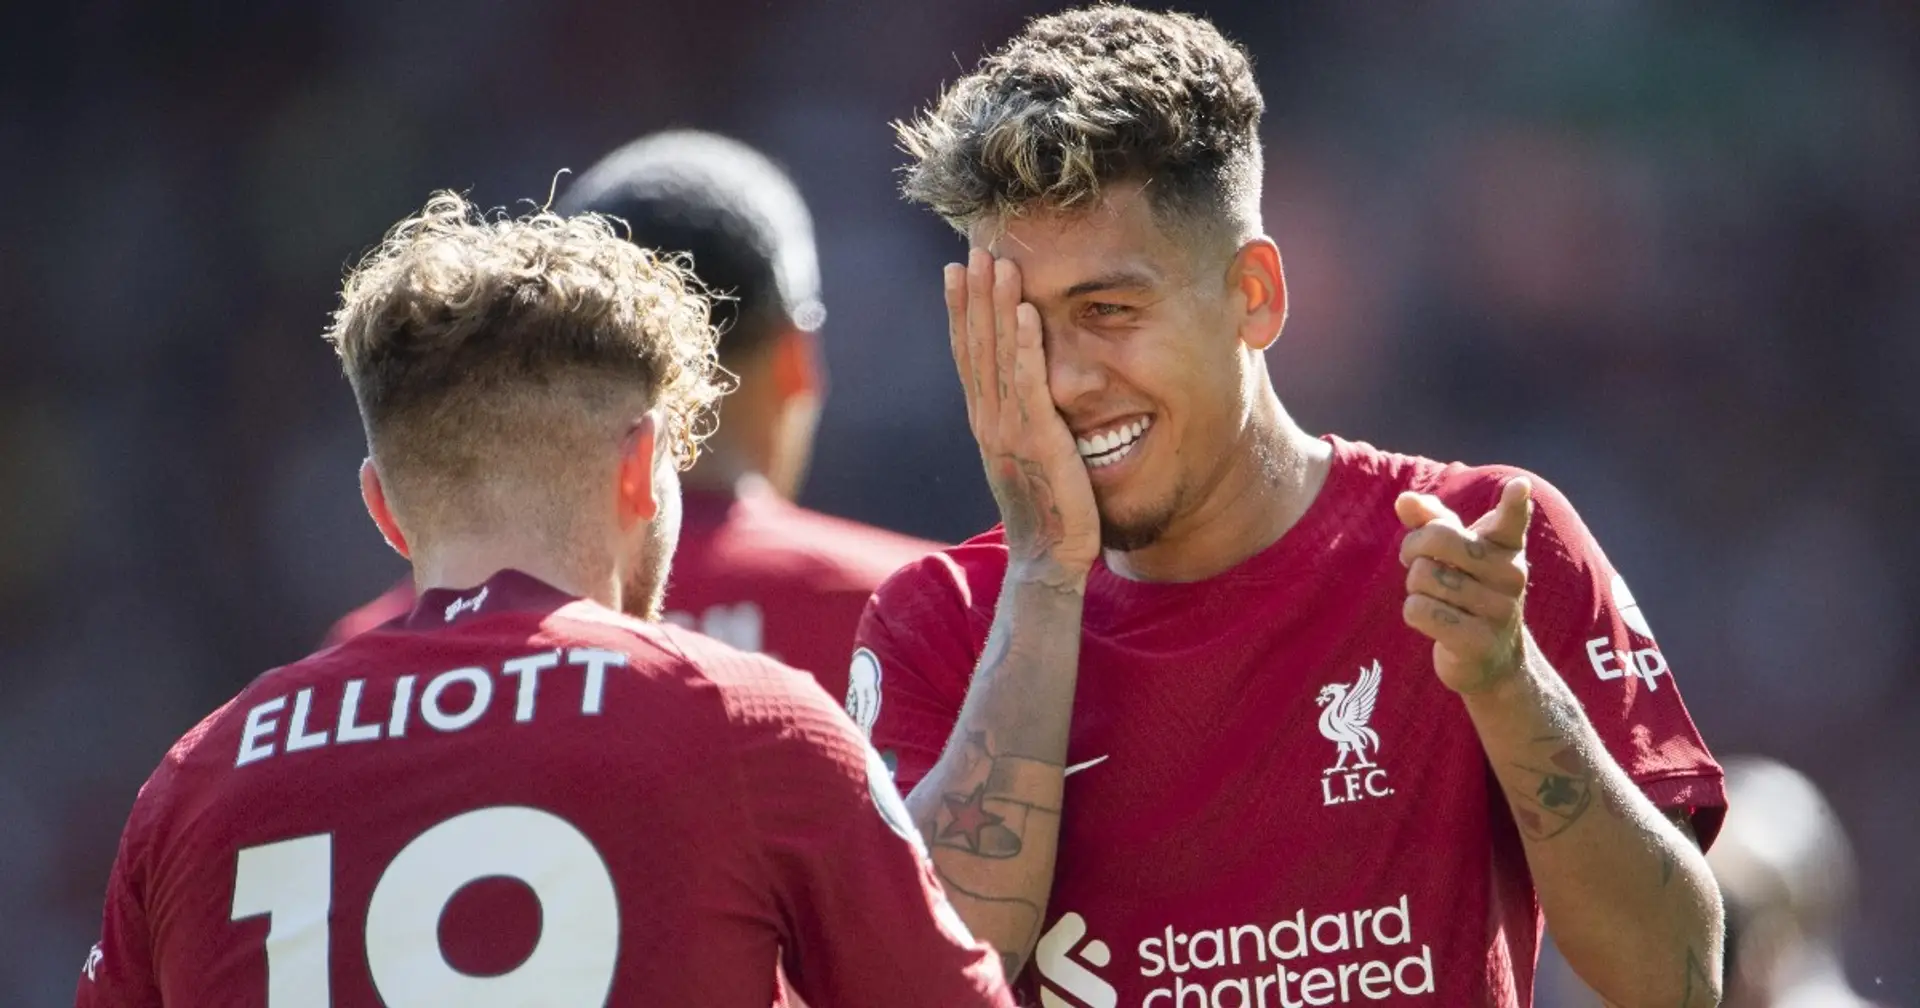 'What a send-off': Elliott on Firmino scoring in his last Anfield game